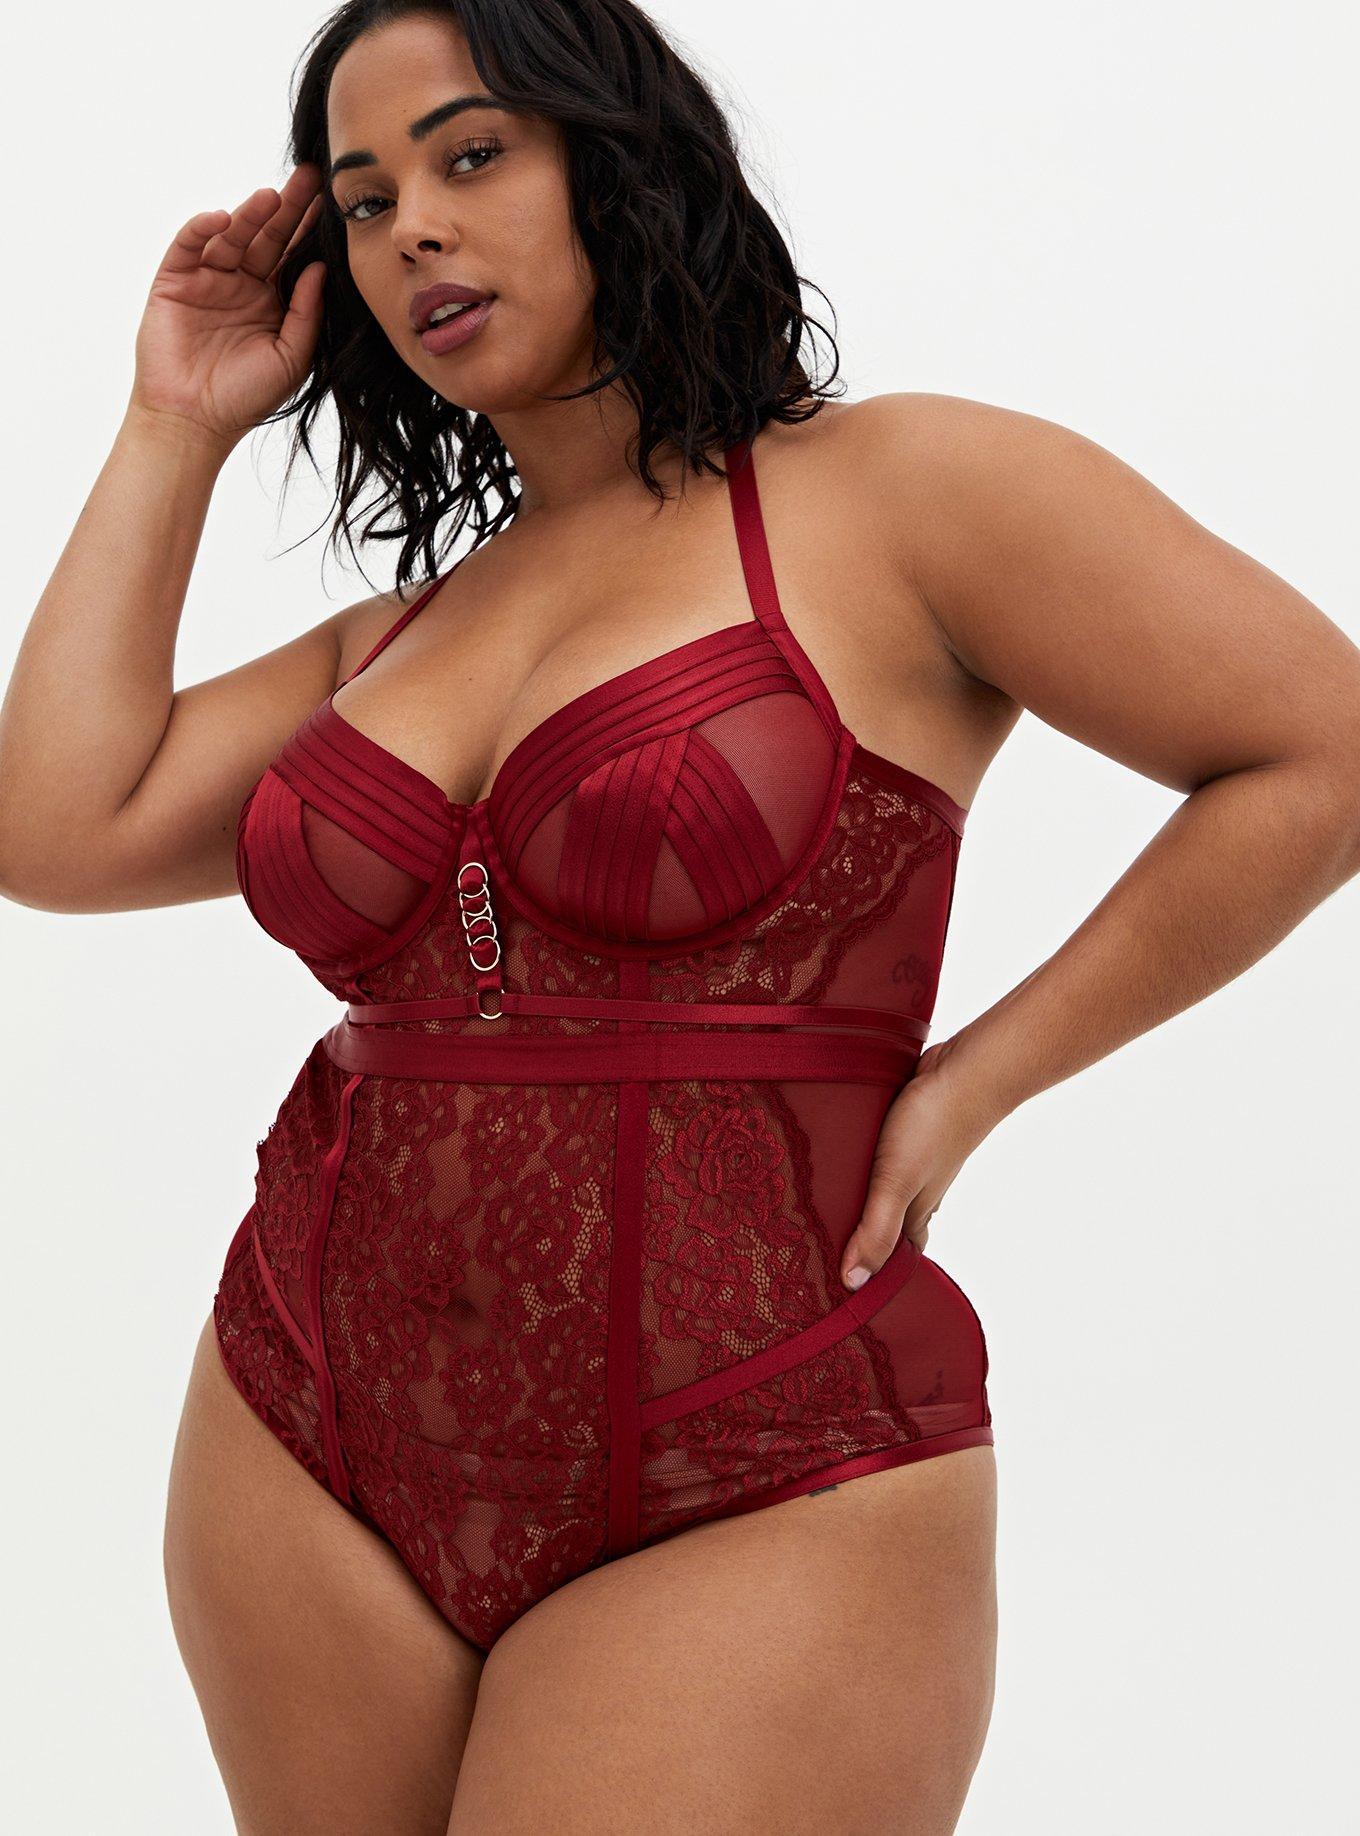 New Torrid Satin and Lace High Neck Bra Top Size 2 Burgundy Red Underwire  LL